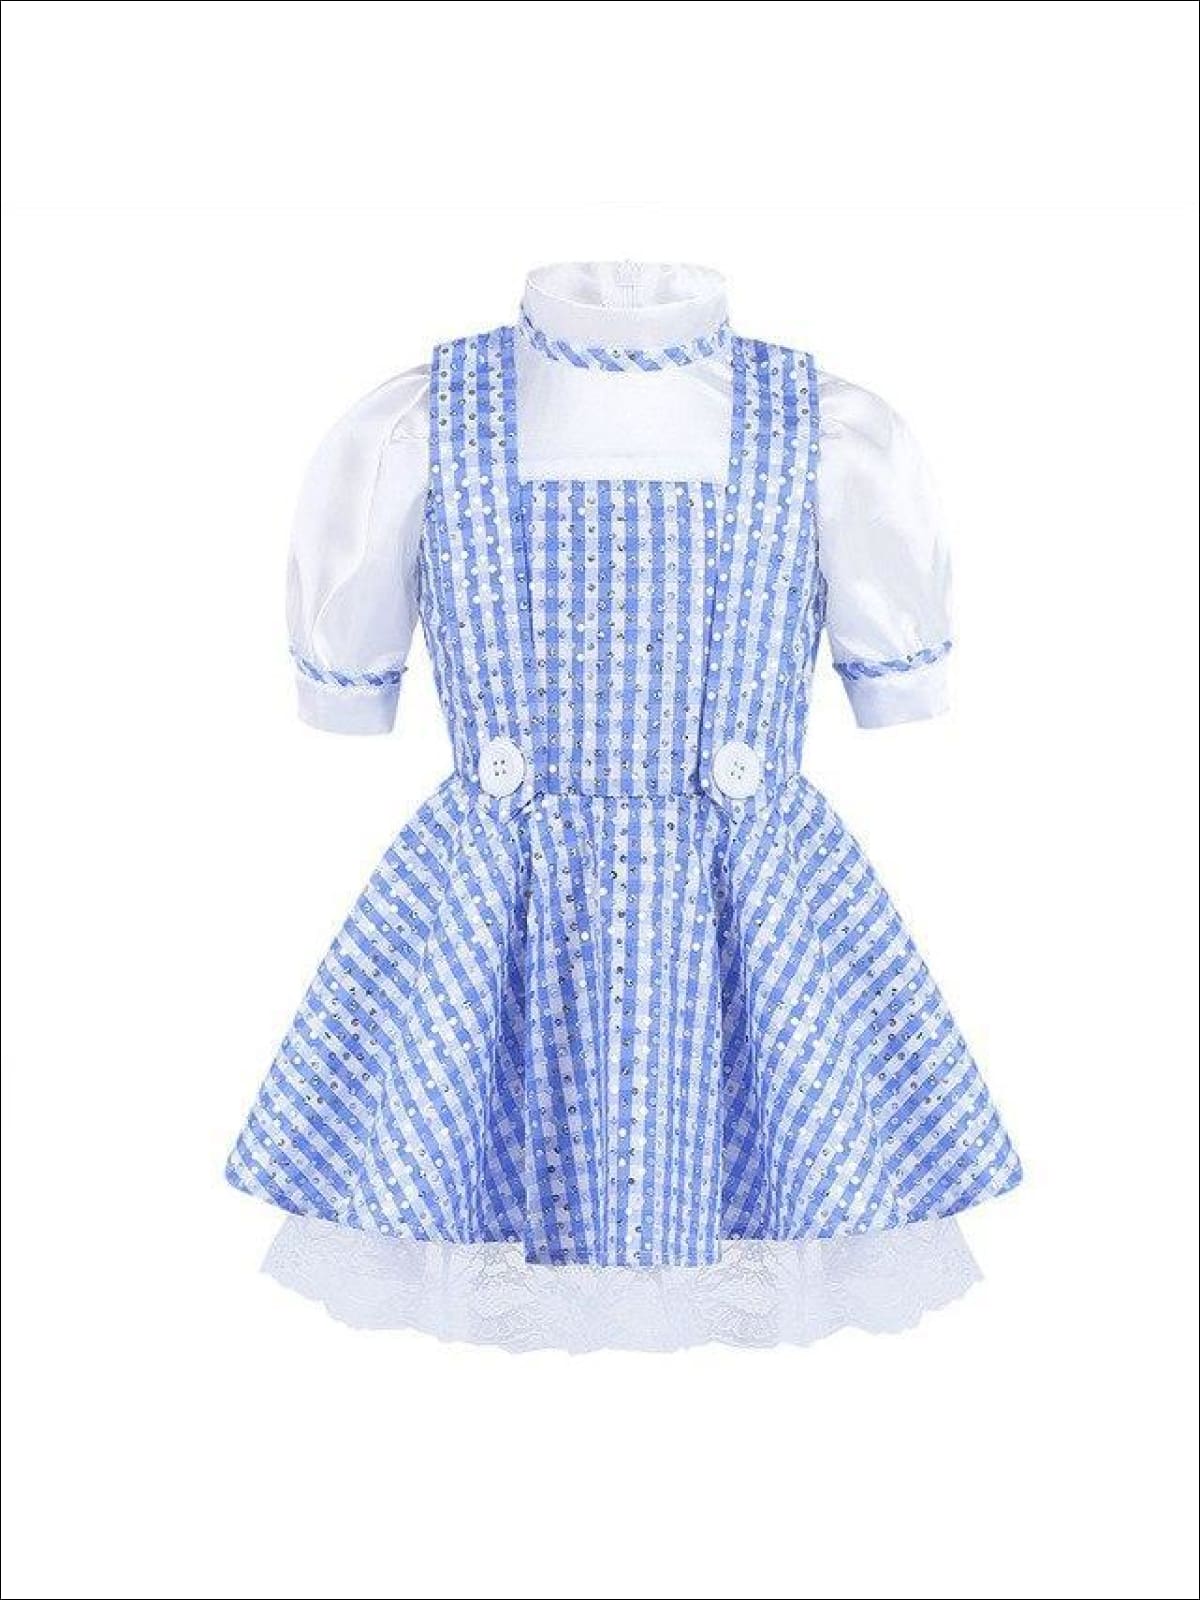 Girls Dorothy from Wizard of Oz Inspired Halloween Costume - Girls Halloween Costume